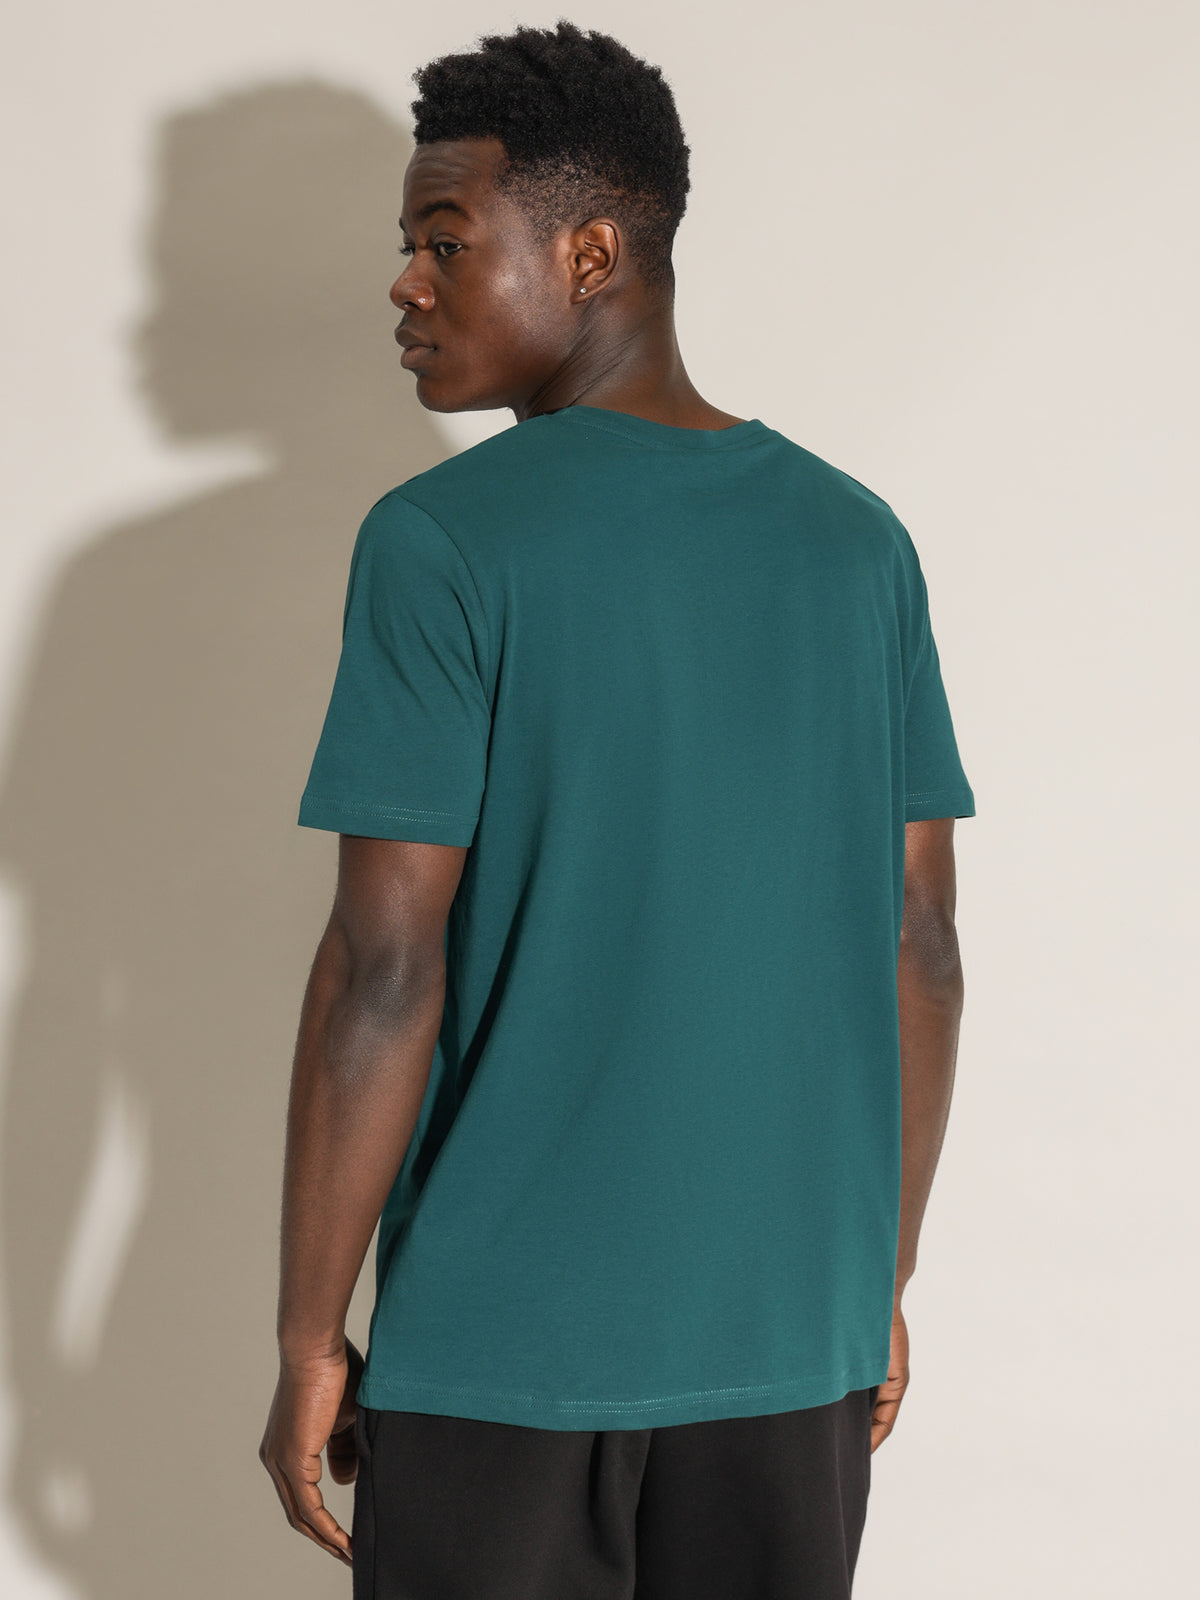 Authentic Dorian T-Shirt in Teal